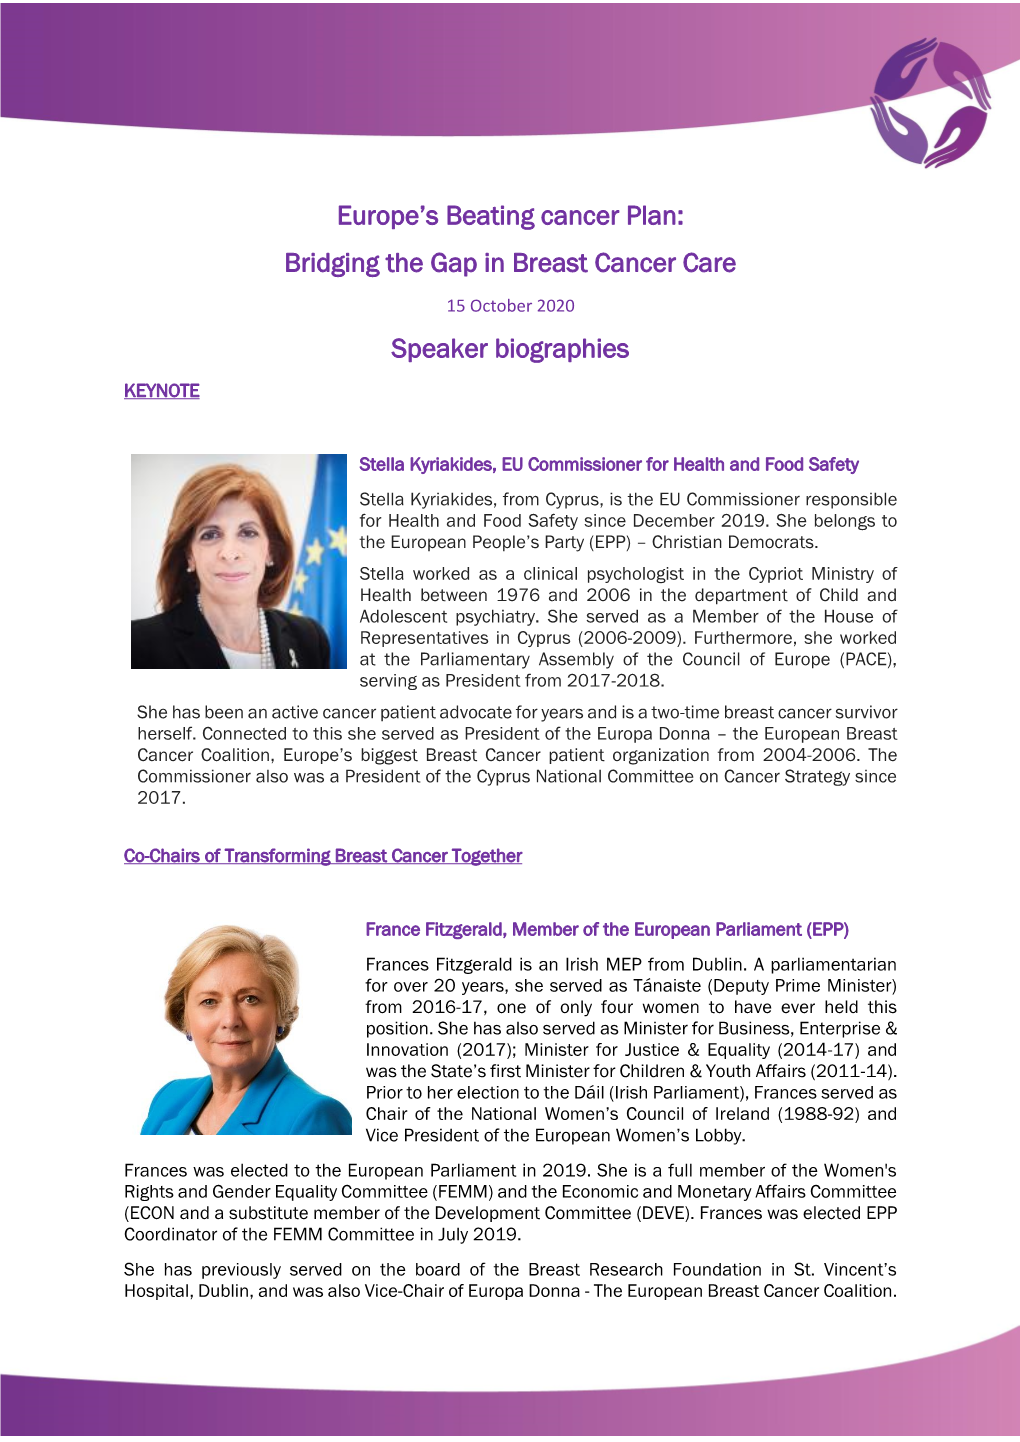 Europe's Beating Cancer Plan: Bridging the Gap in Breast Cancer